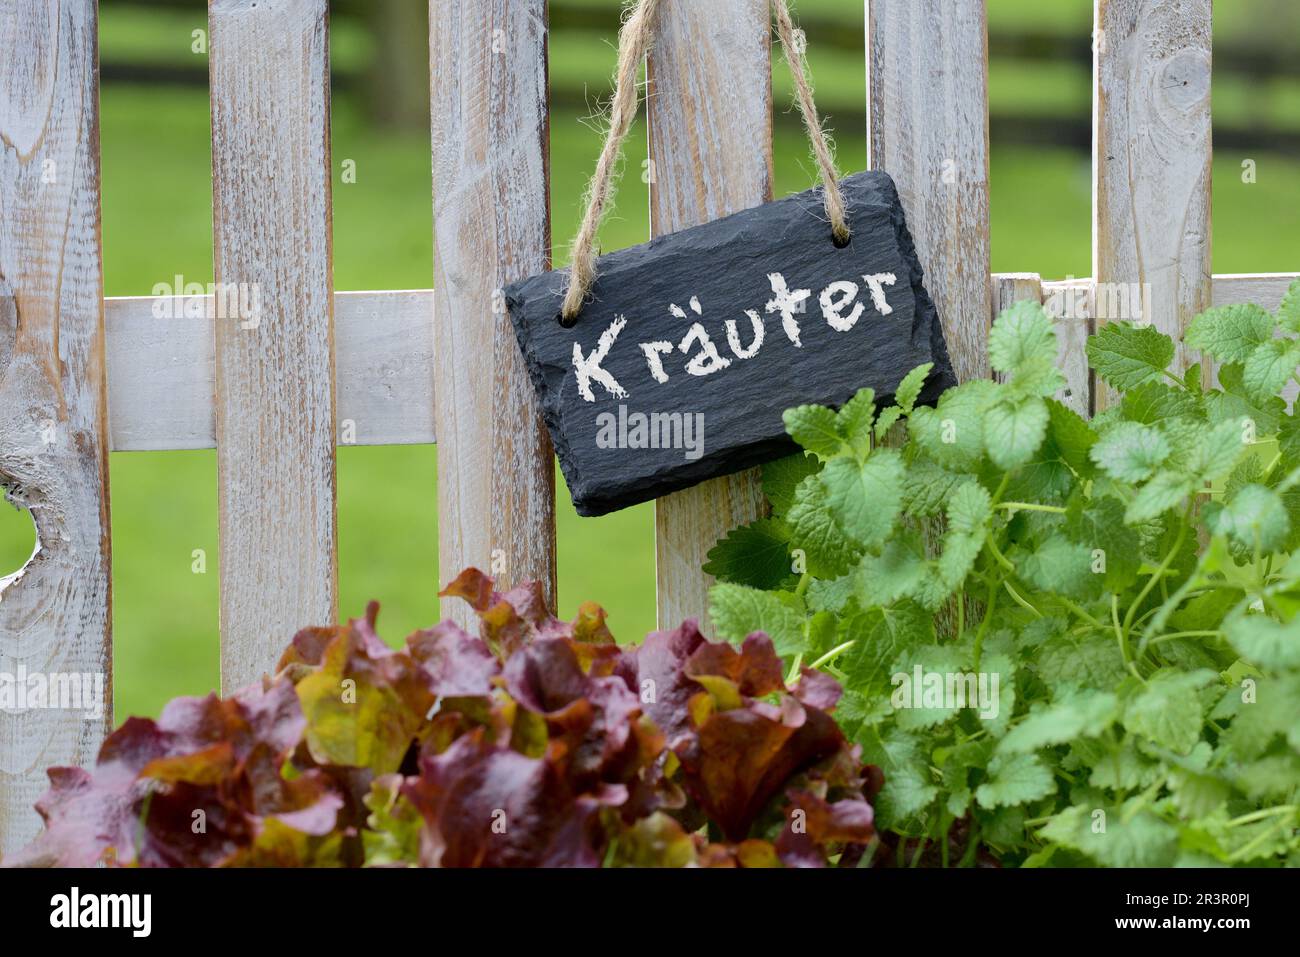 garden fence with black board lettering Kraeuter, herbs Stock Photo